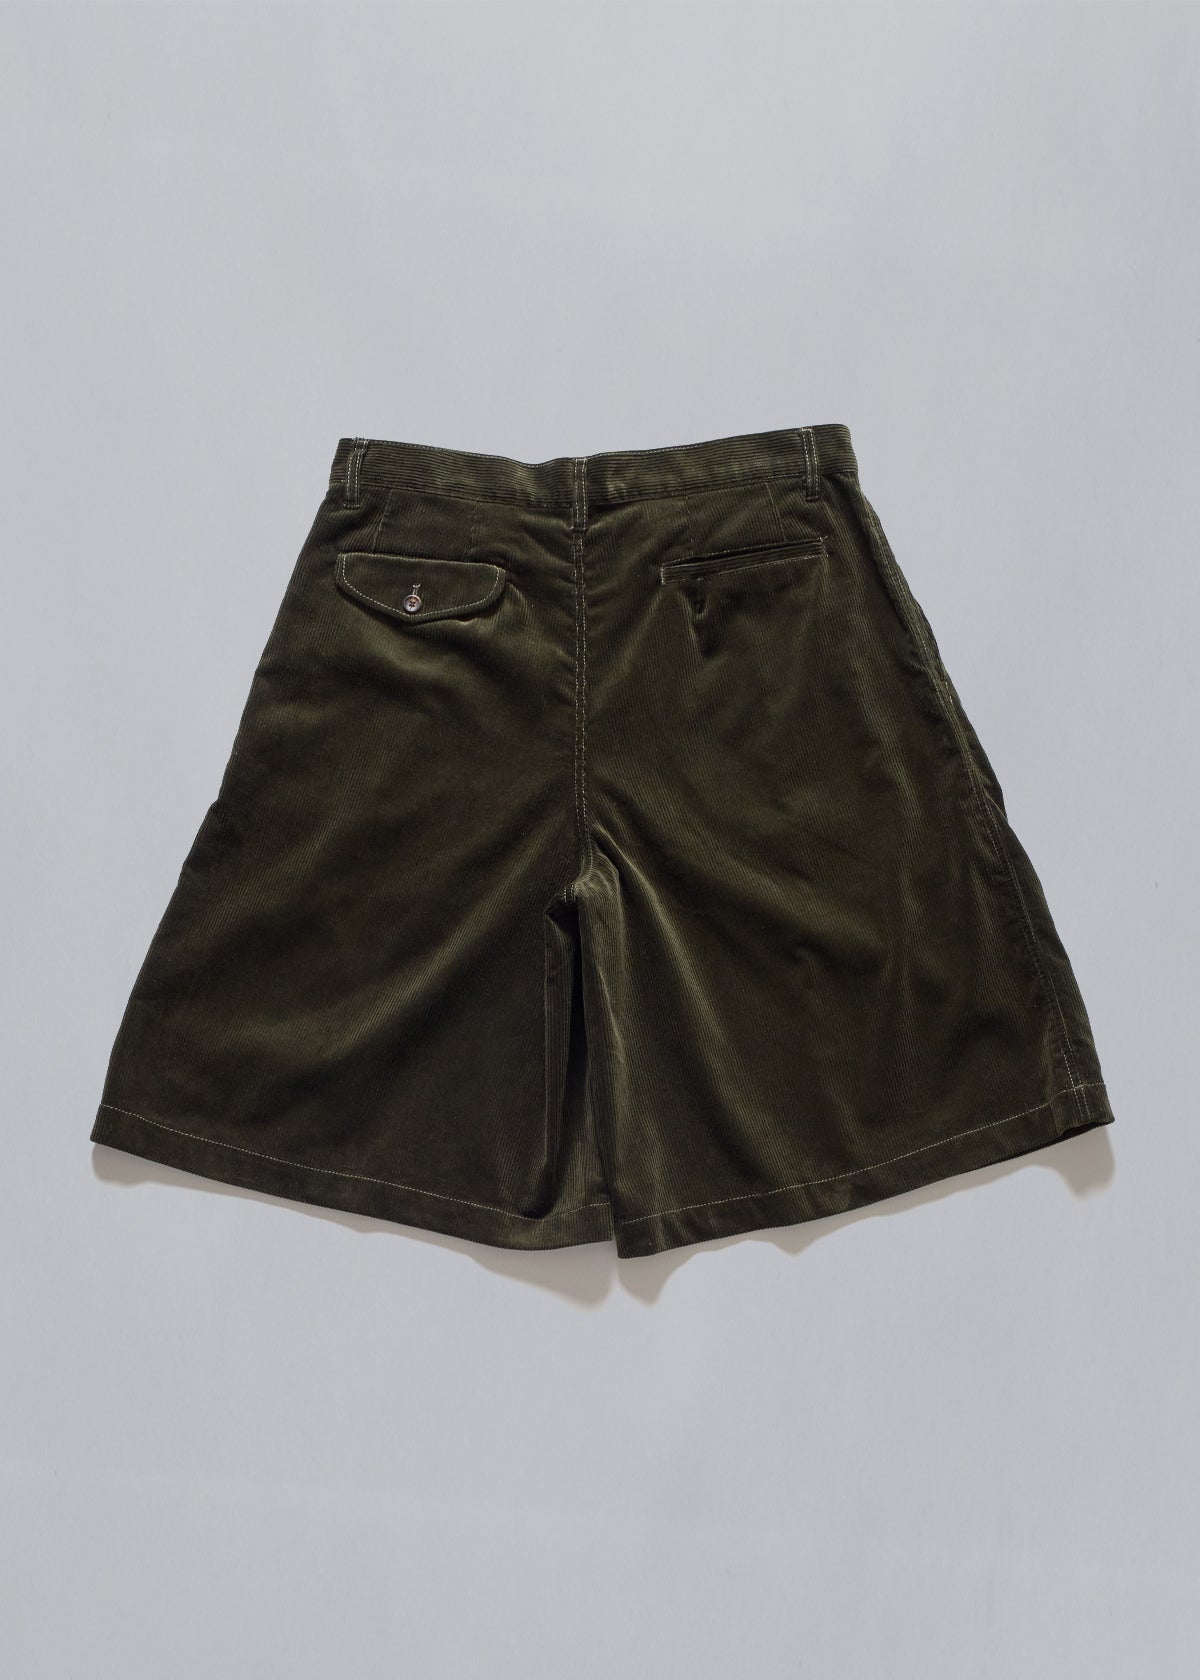 Shirt Wide Corduroy Shorts SS2020 - Large - The Archivist Store